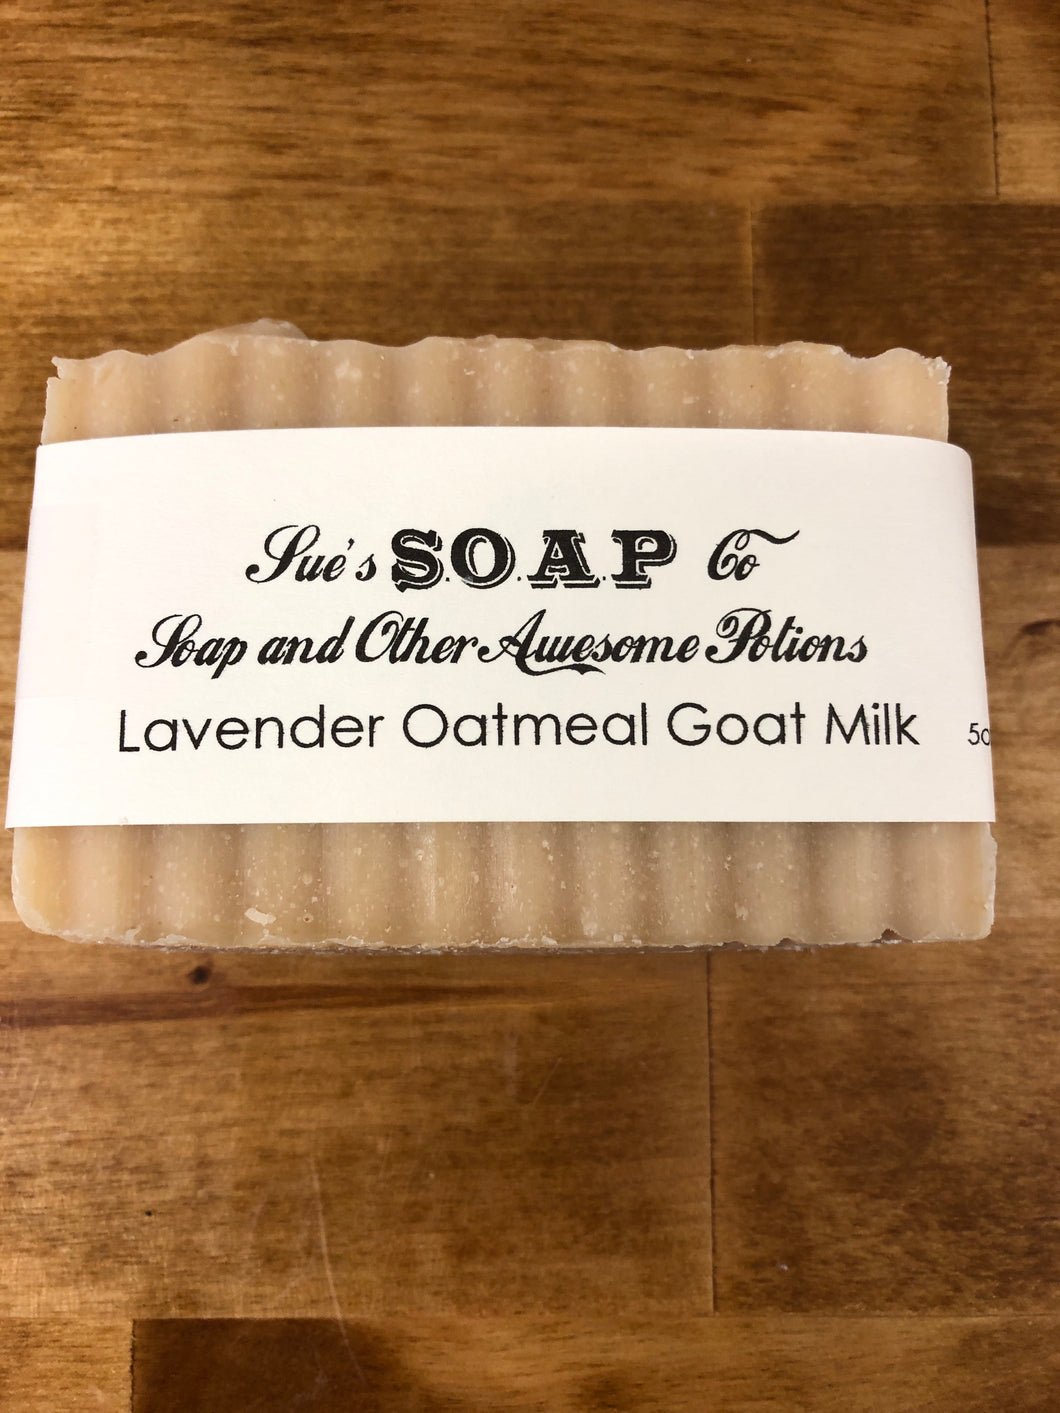 Lavender Goat Milk with oatmeal